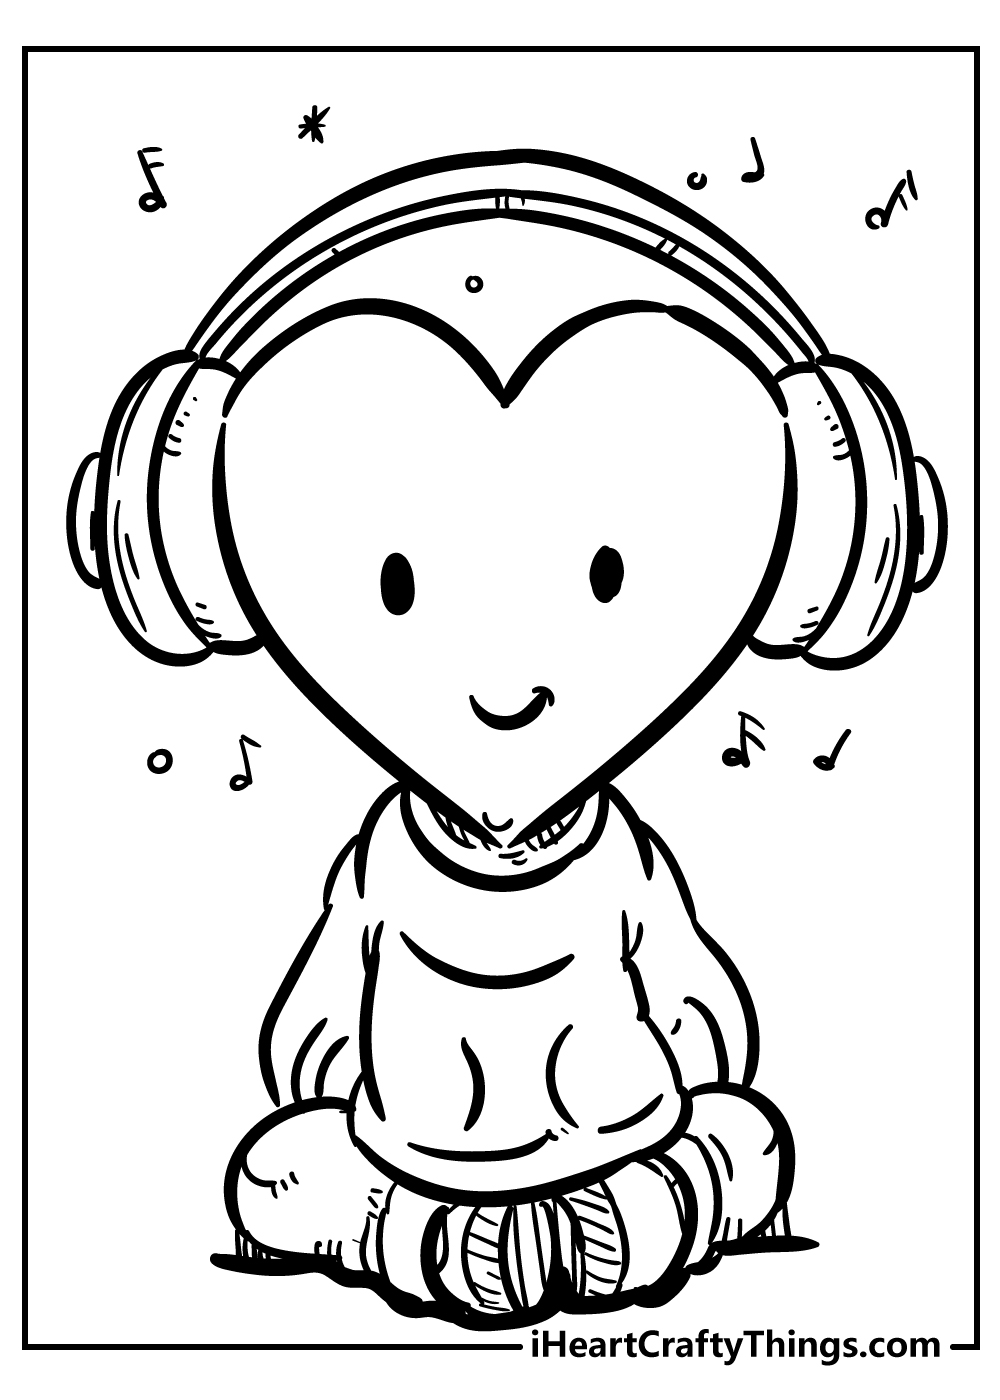 heart coloring pages for kids free download